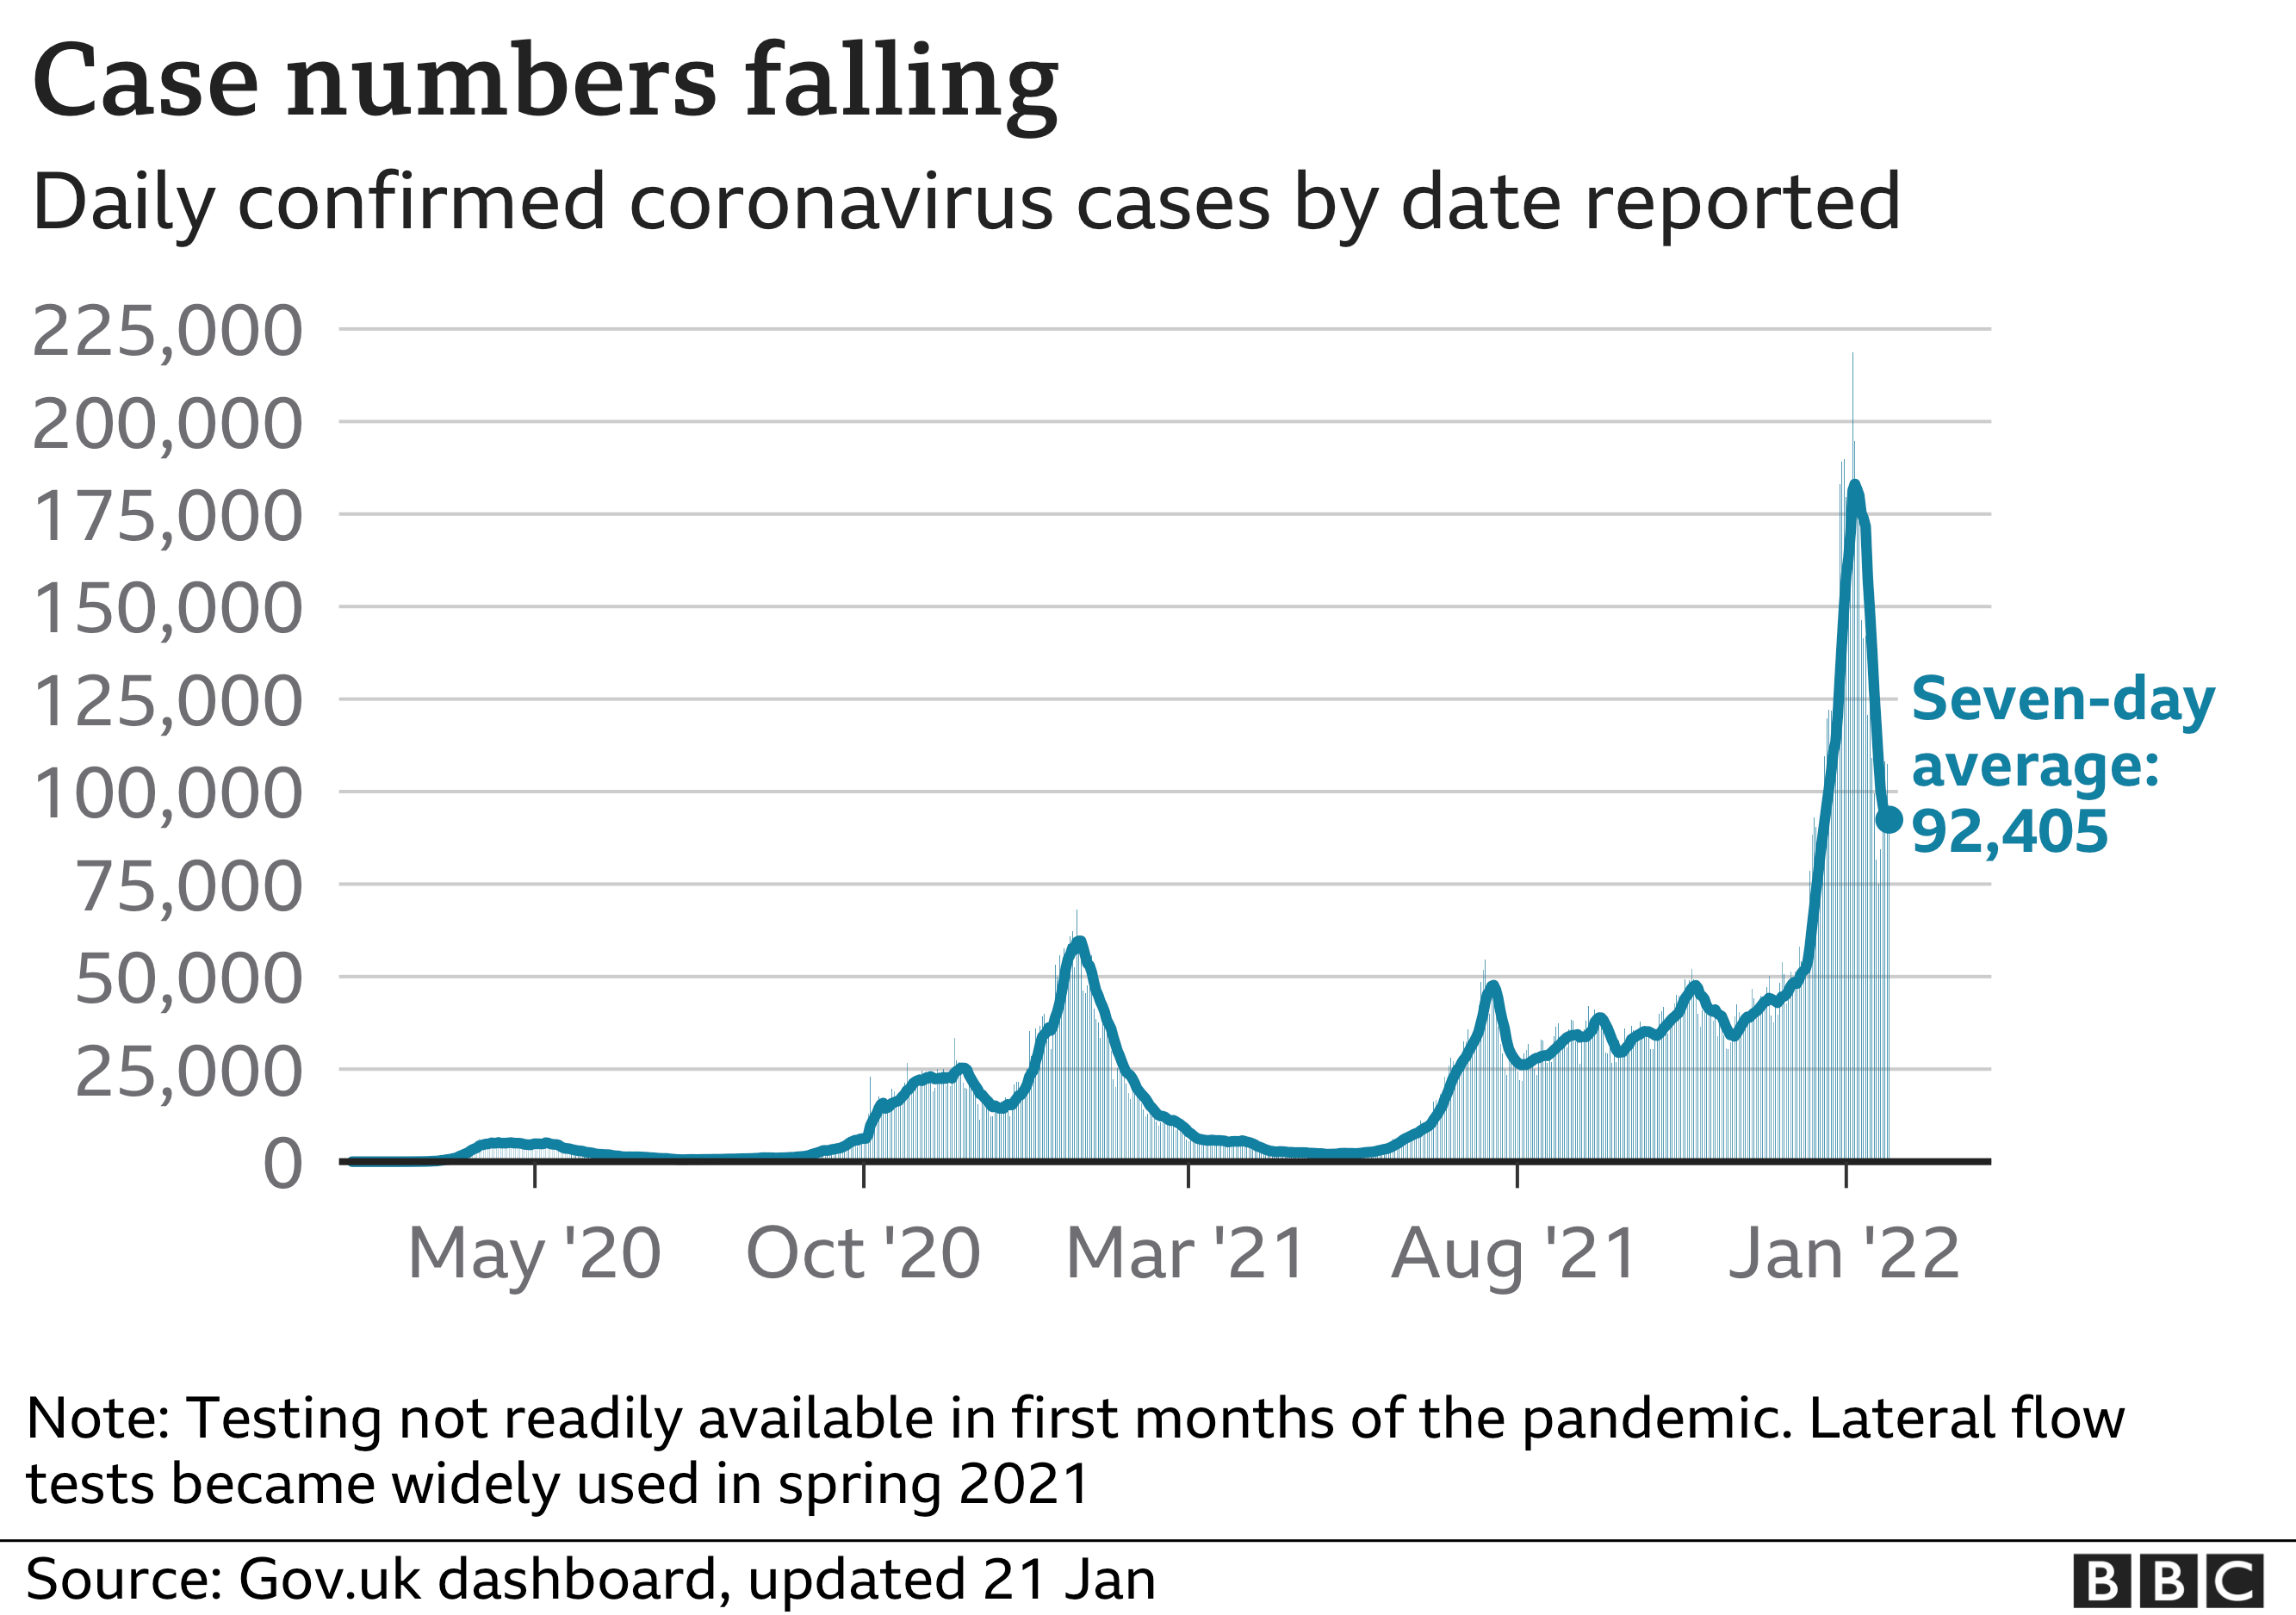 Chart showing that the number of daily cases is falling